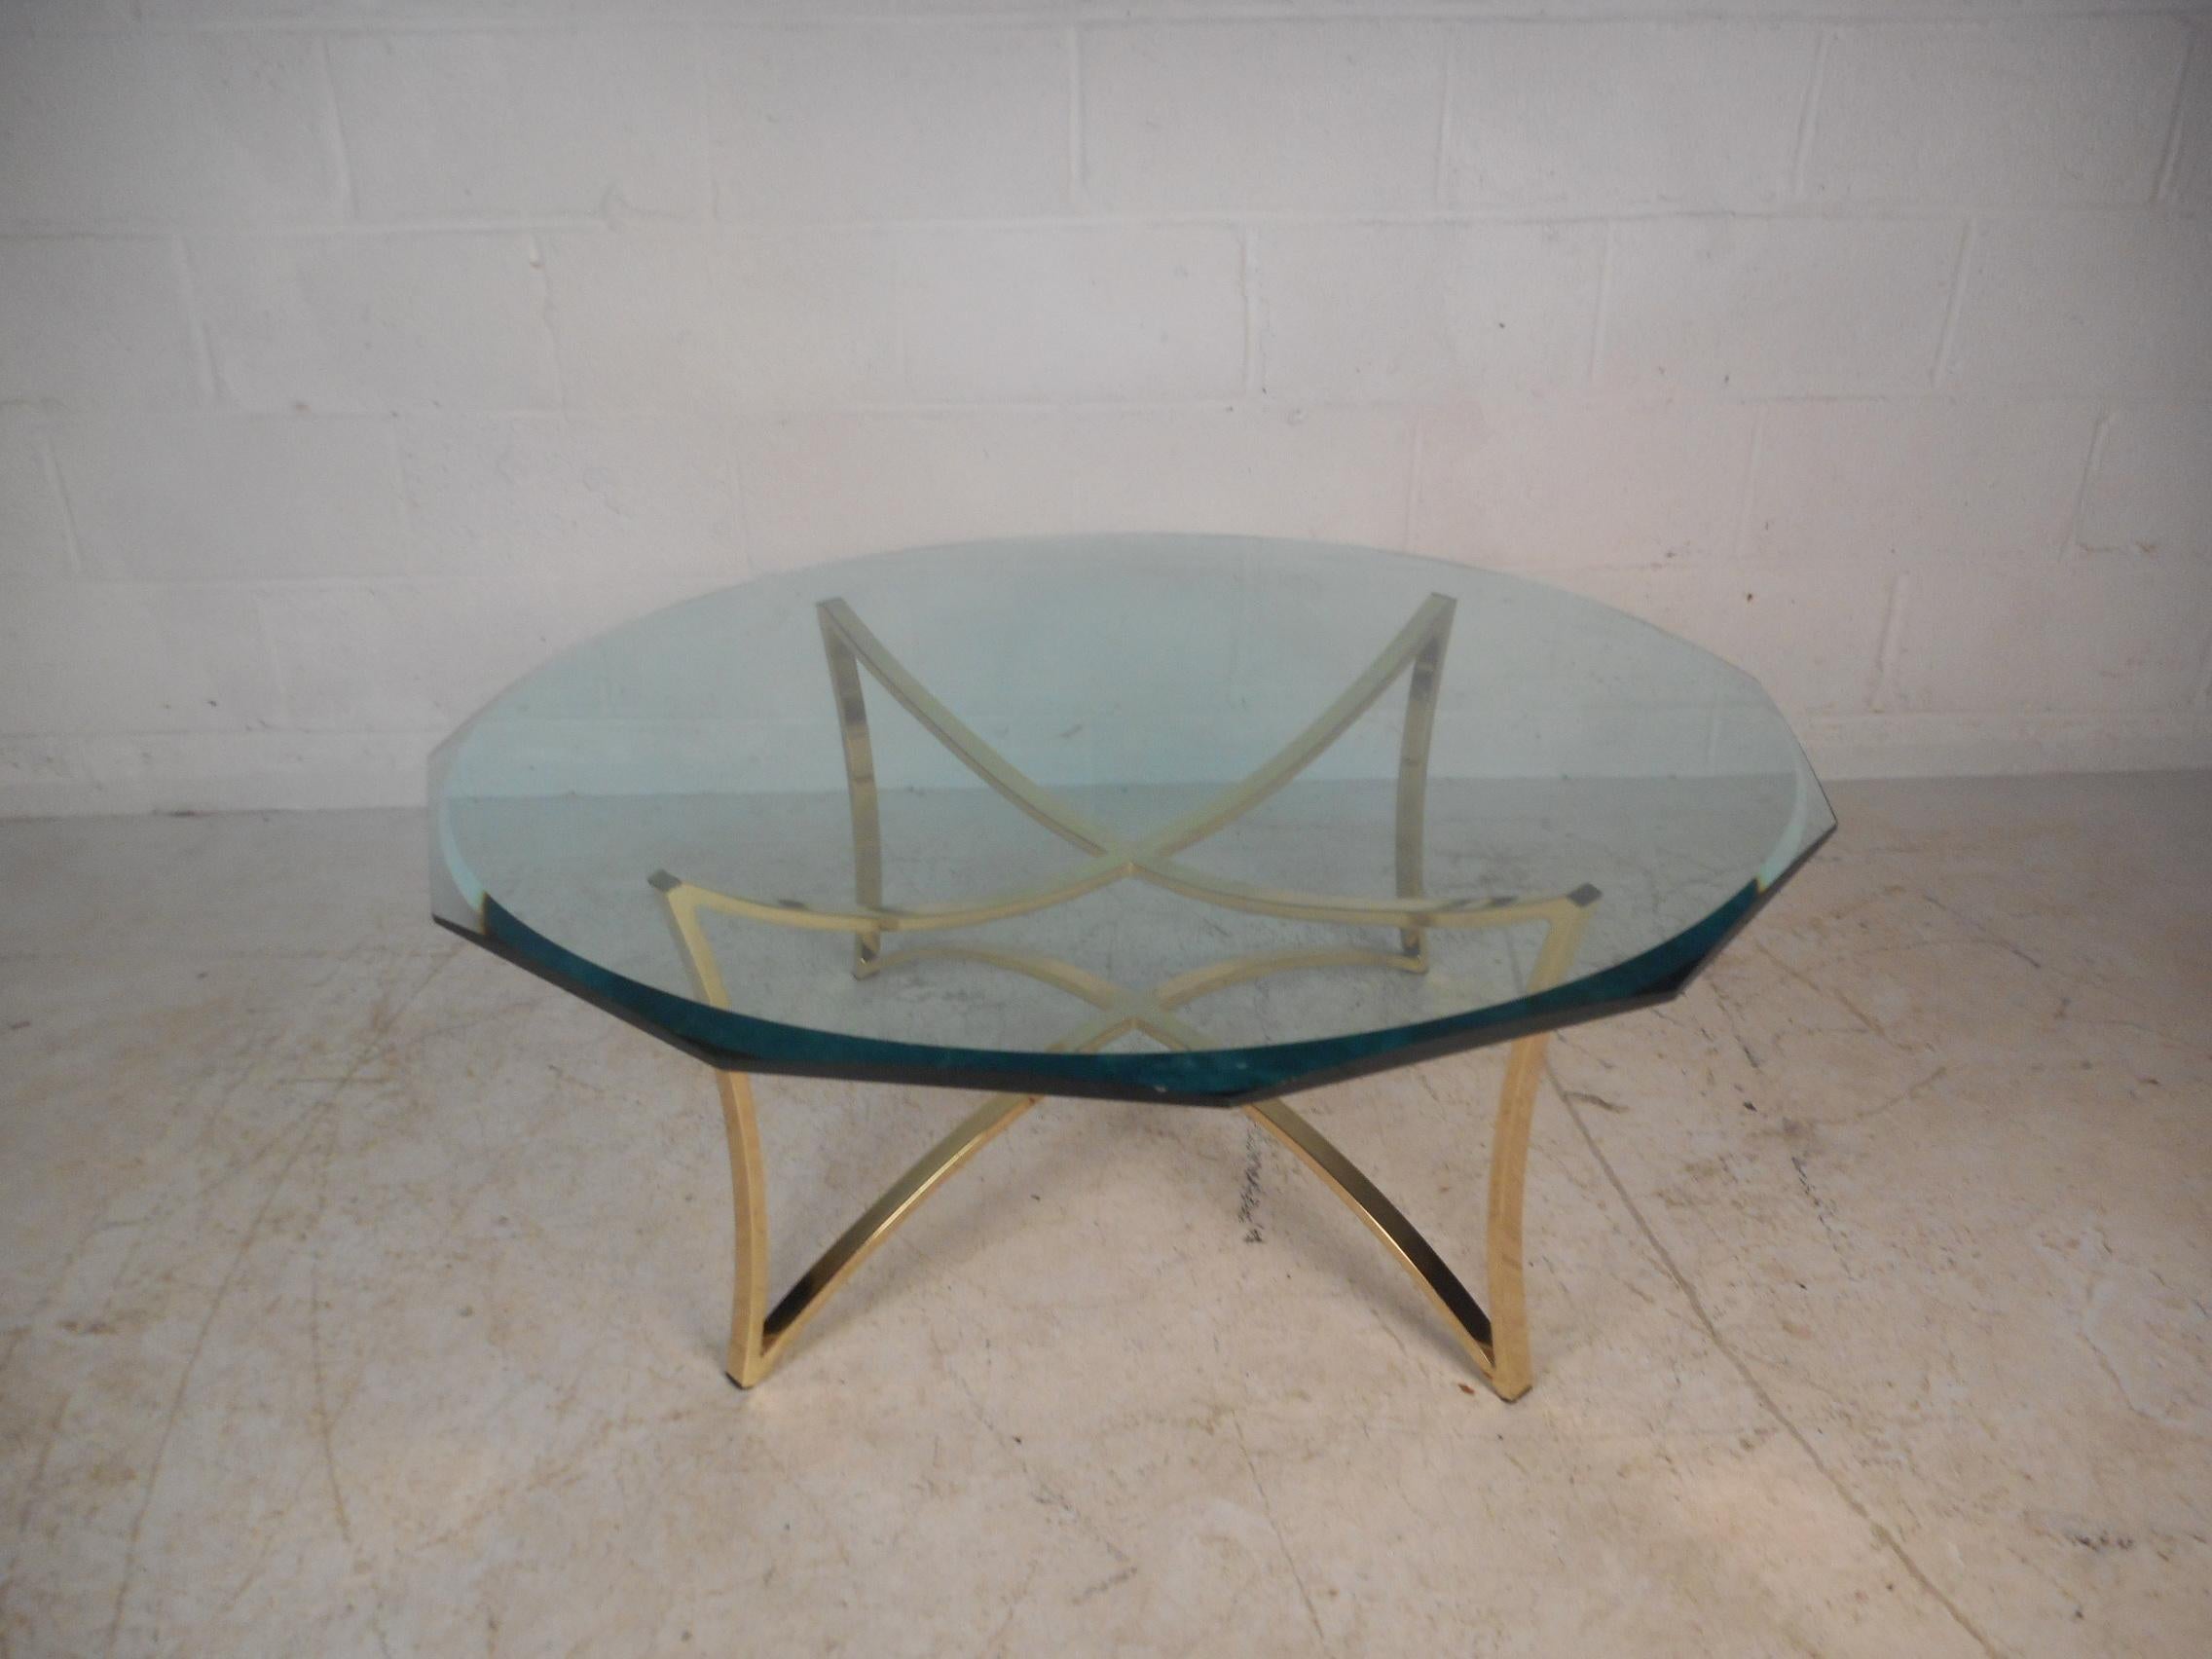 This stunning midcentury coffee table features a sculpted brass base with an unusually shaped, thick glass top. A sleek design with a four sided base with wonderful curves and detail. This stylish piece is sure to add character to any home, business